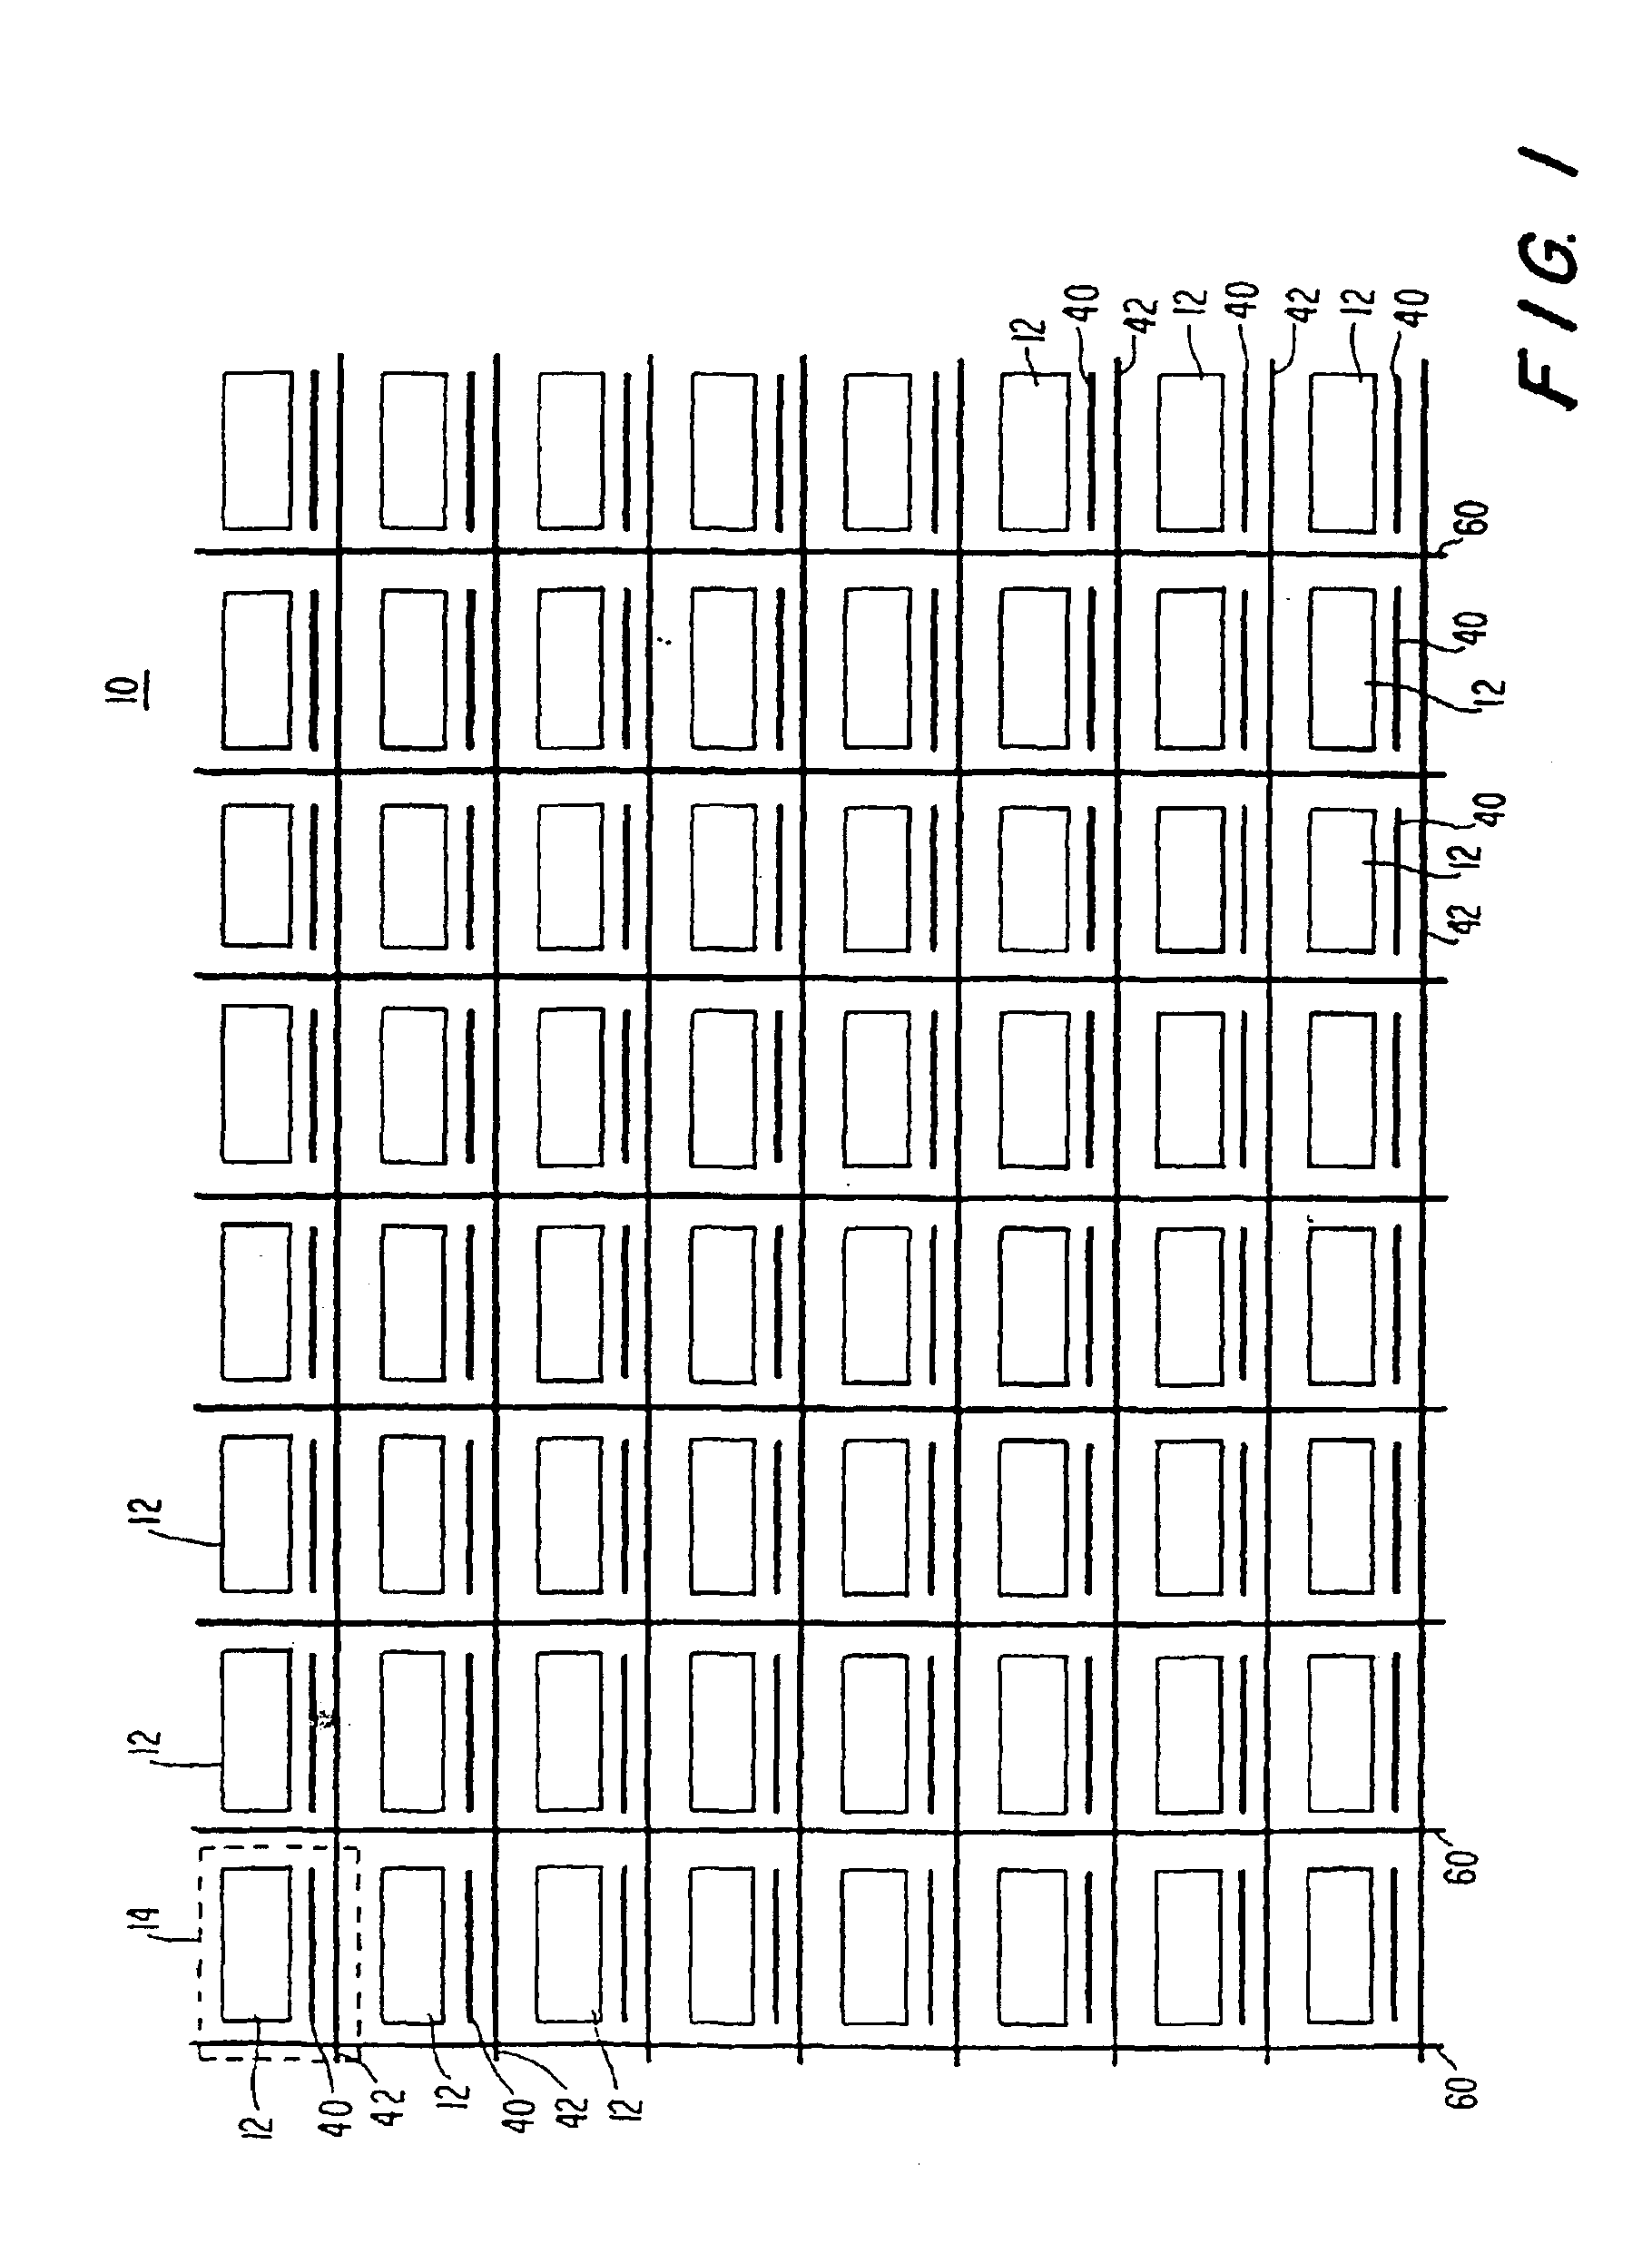 Programmable logic array integrated circuits